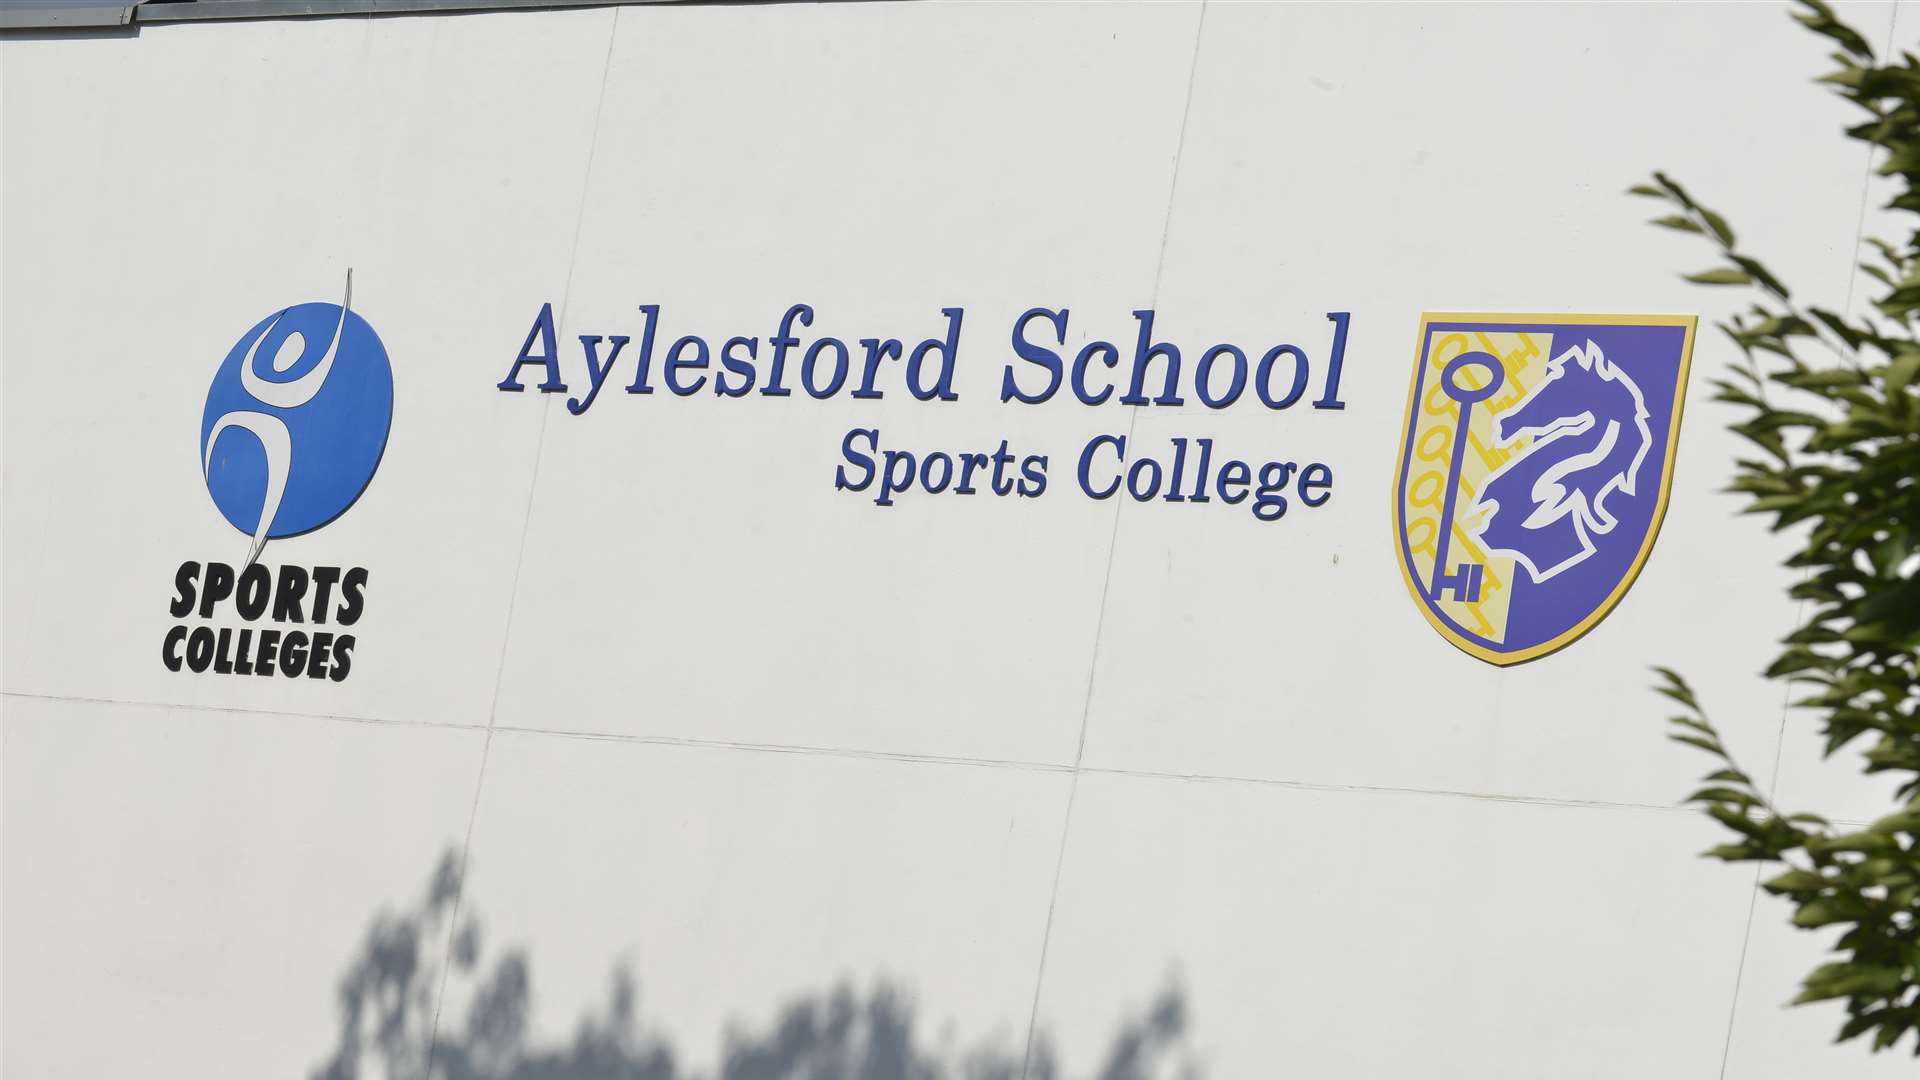 Aylesford School Sports College is the centre of a social media storm.